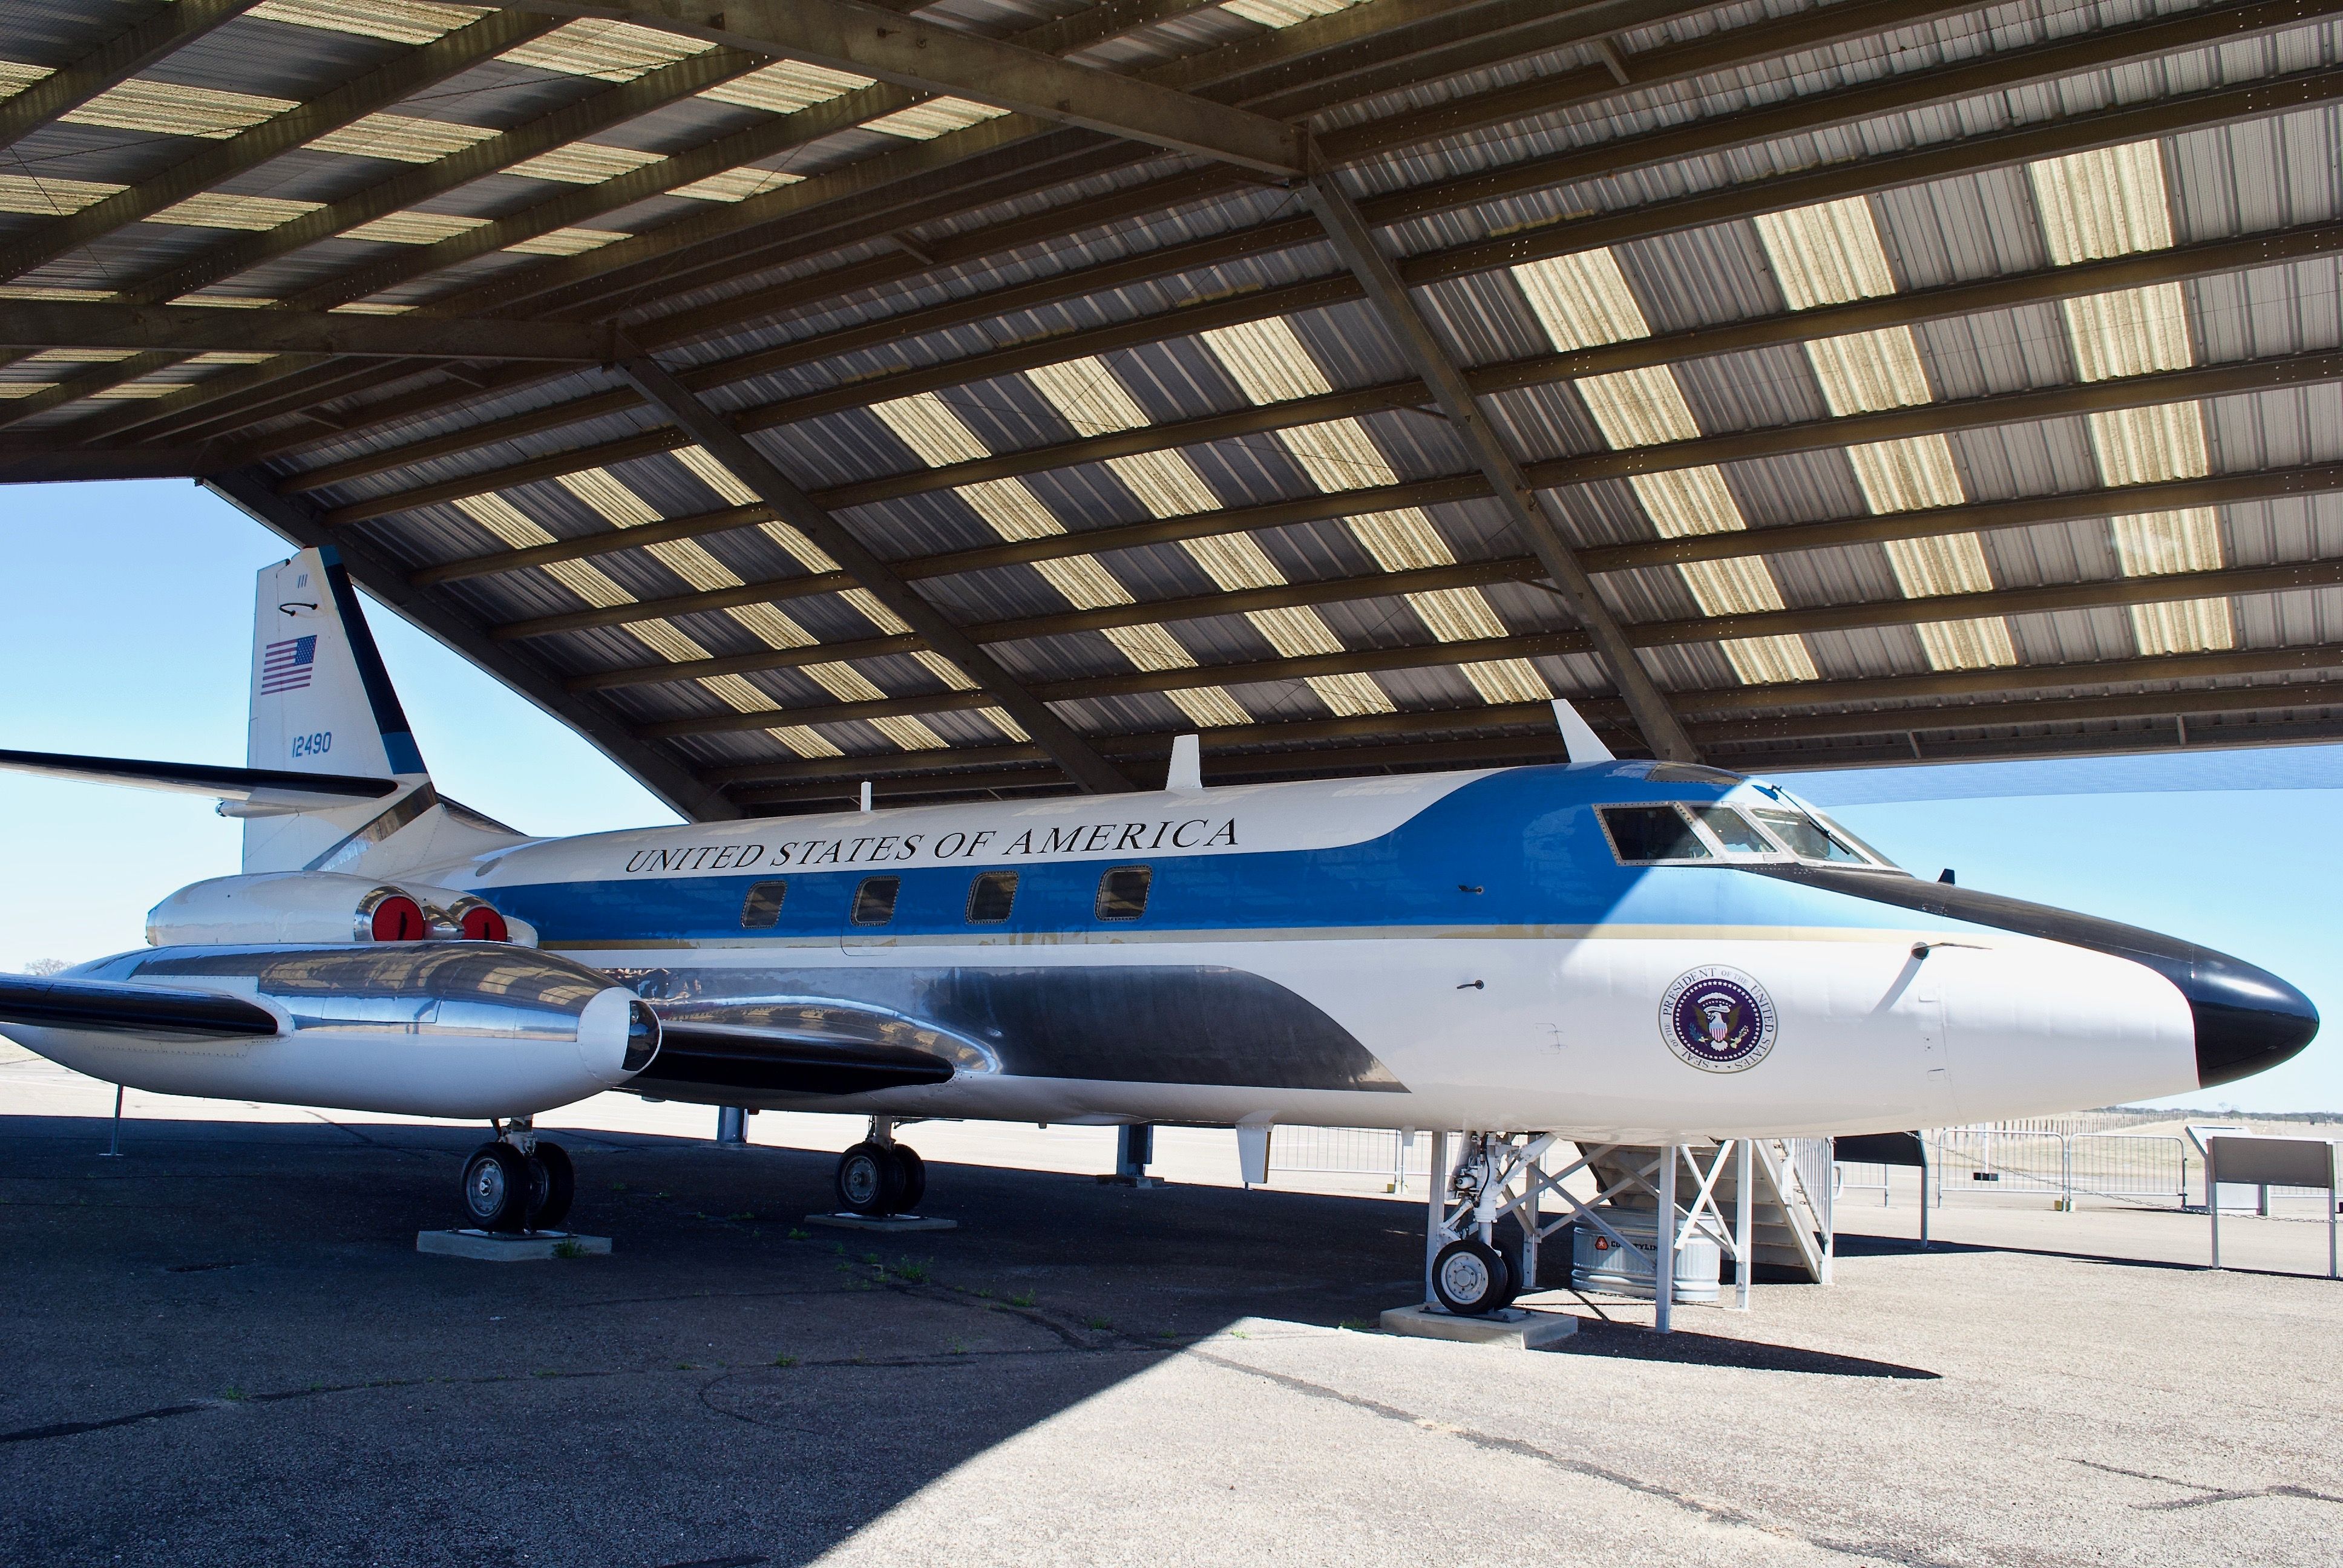 A US Government Lockheed Jetstar parked near an airfield.